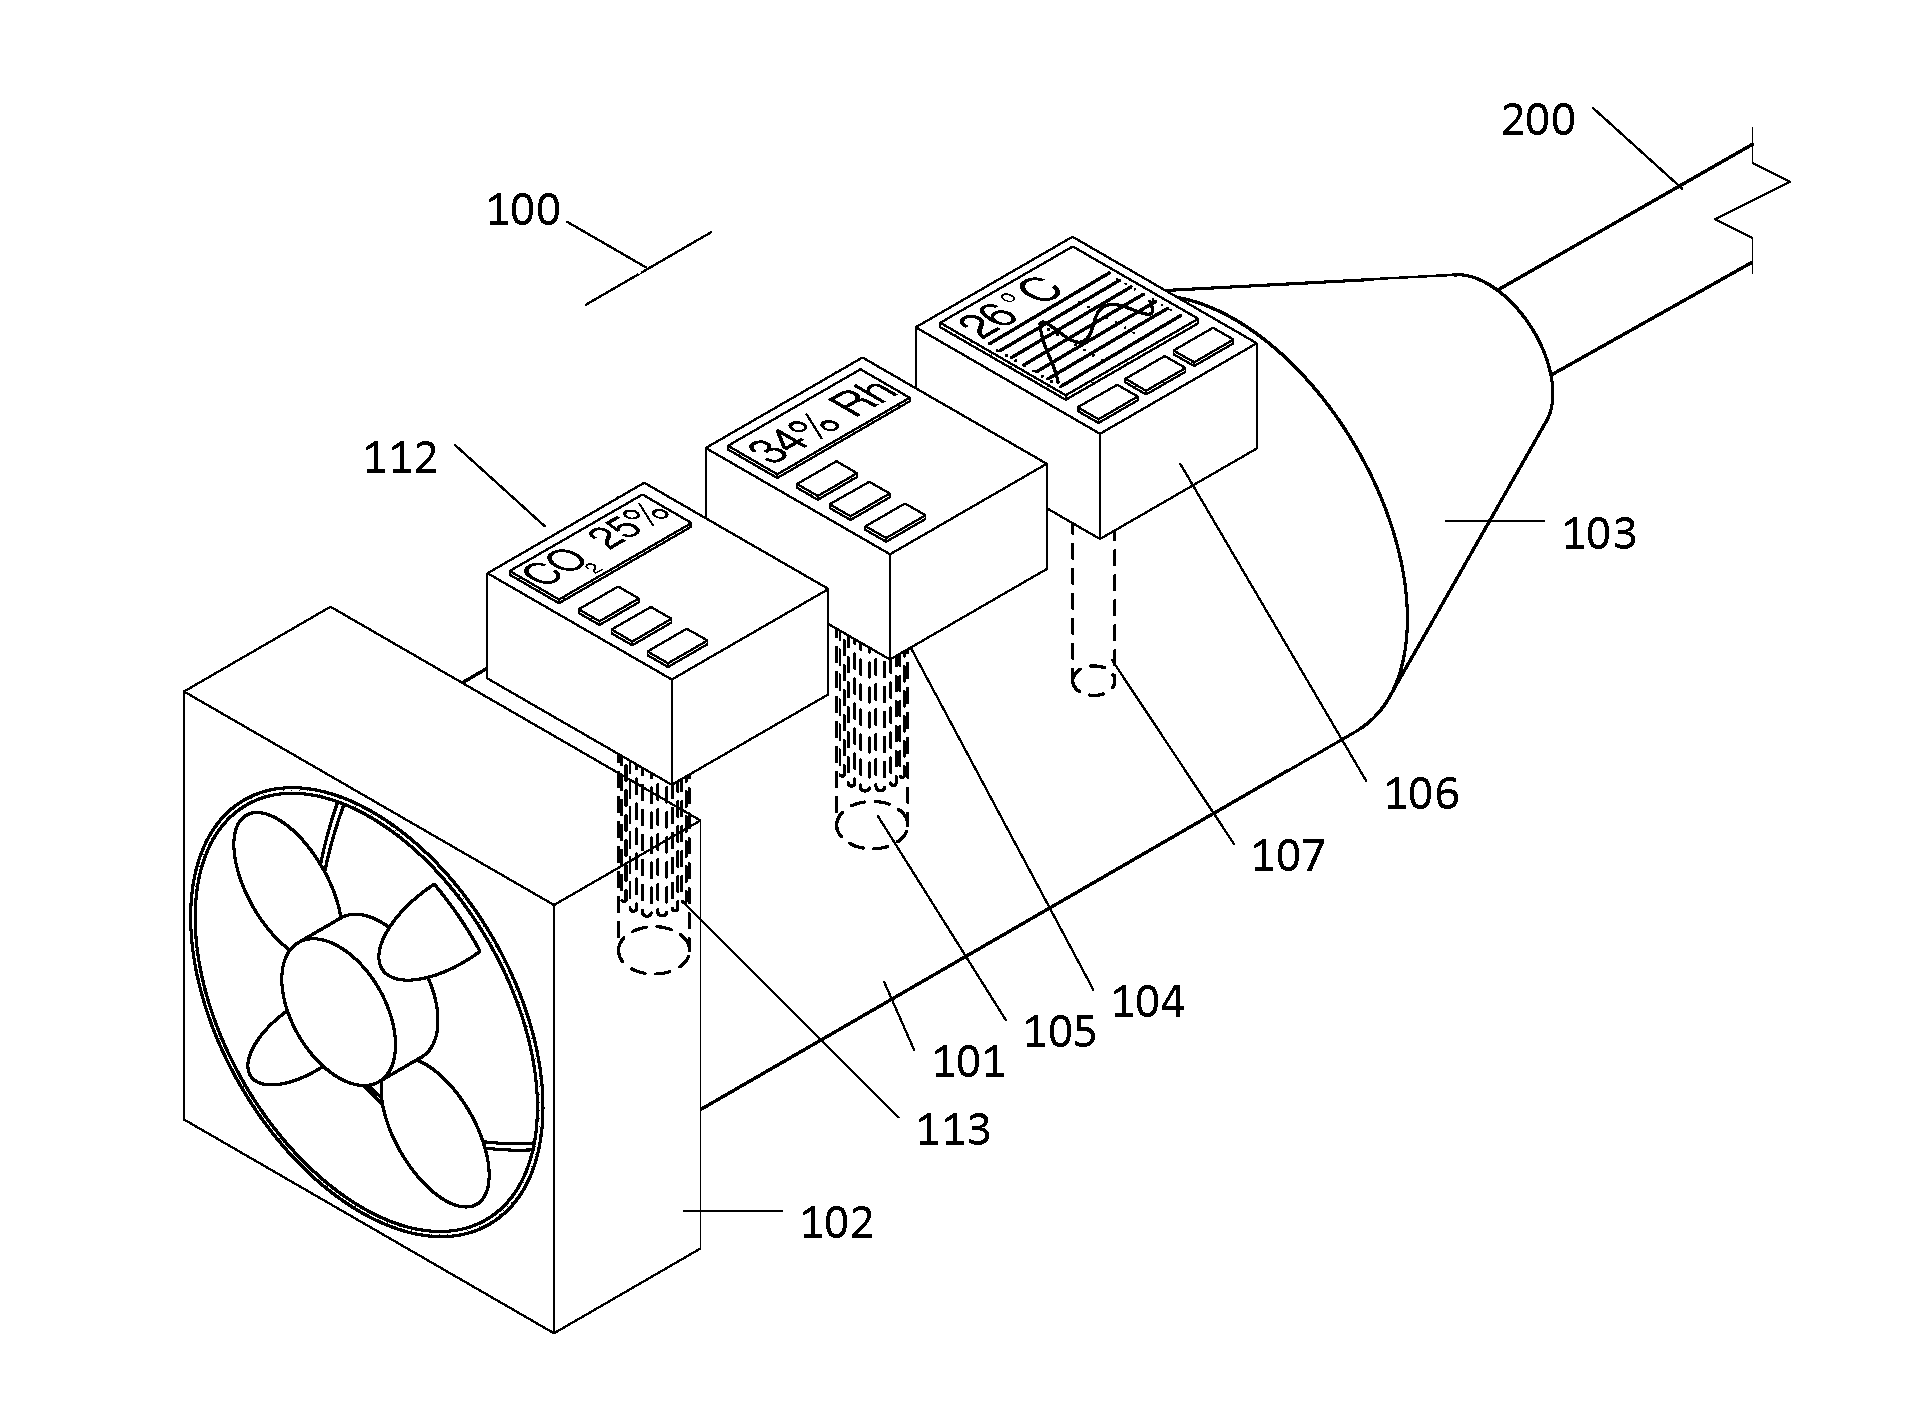 Pumped Air Relative Humidity and Temperature Sensing System with Optional Gas Assay Functionality